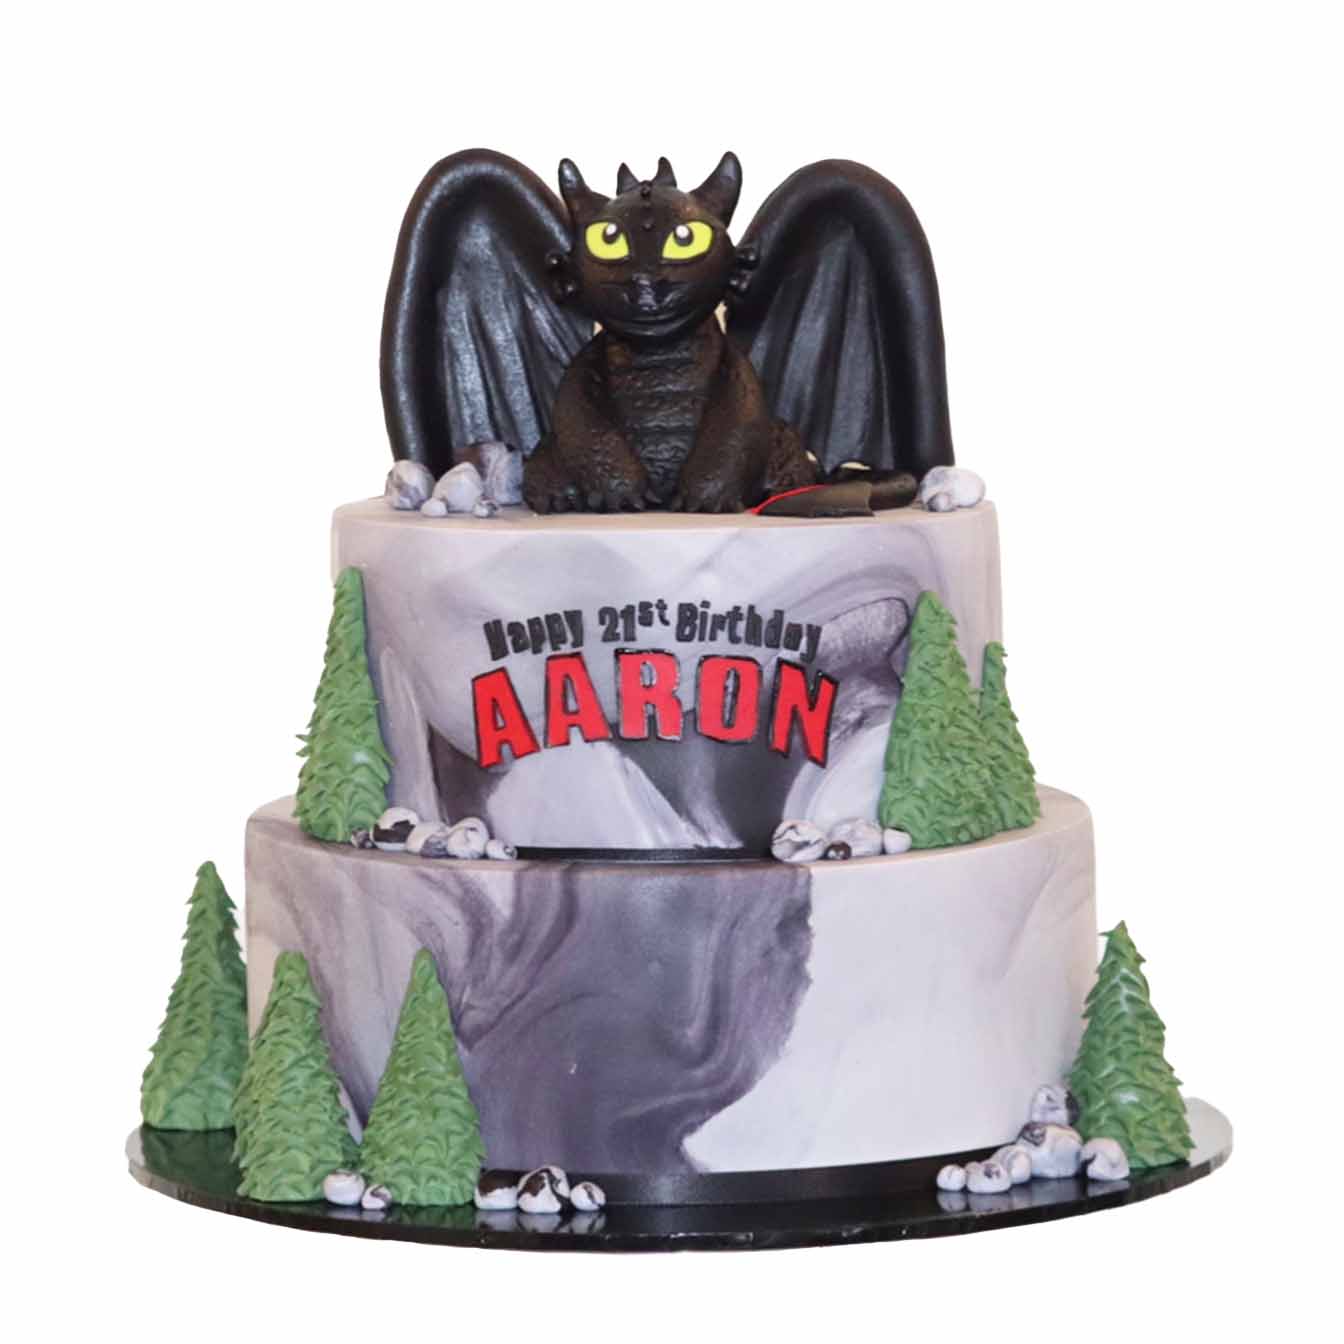 how to train your dragon cake | Baked by Nataleen